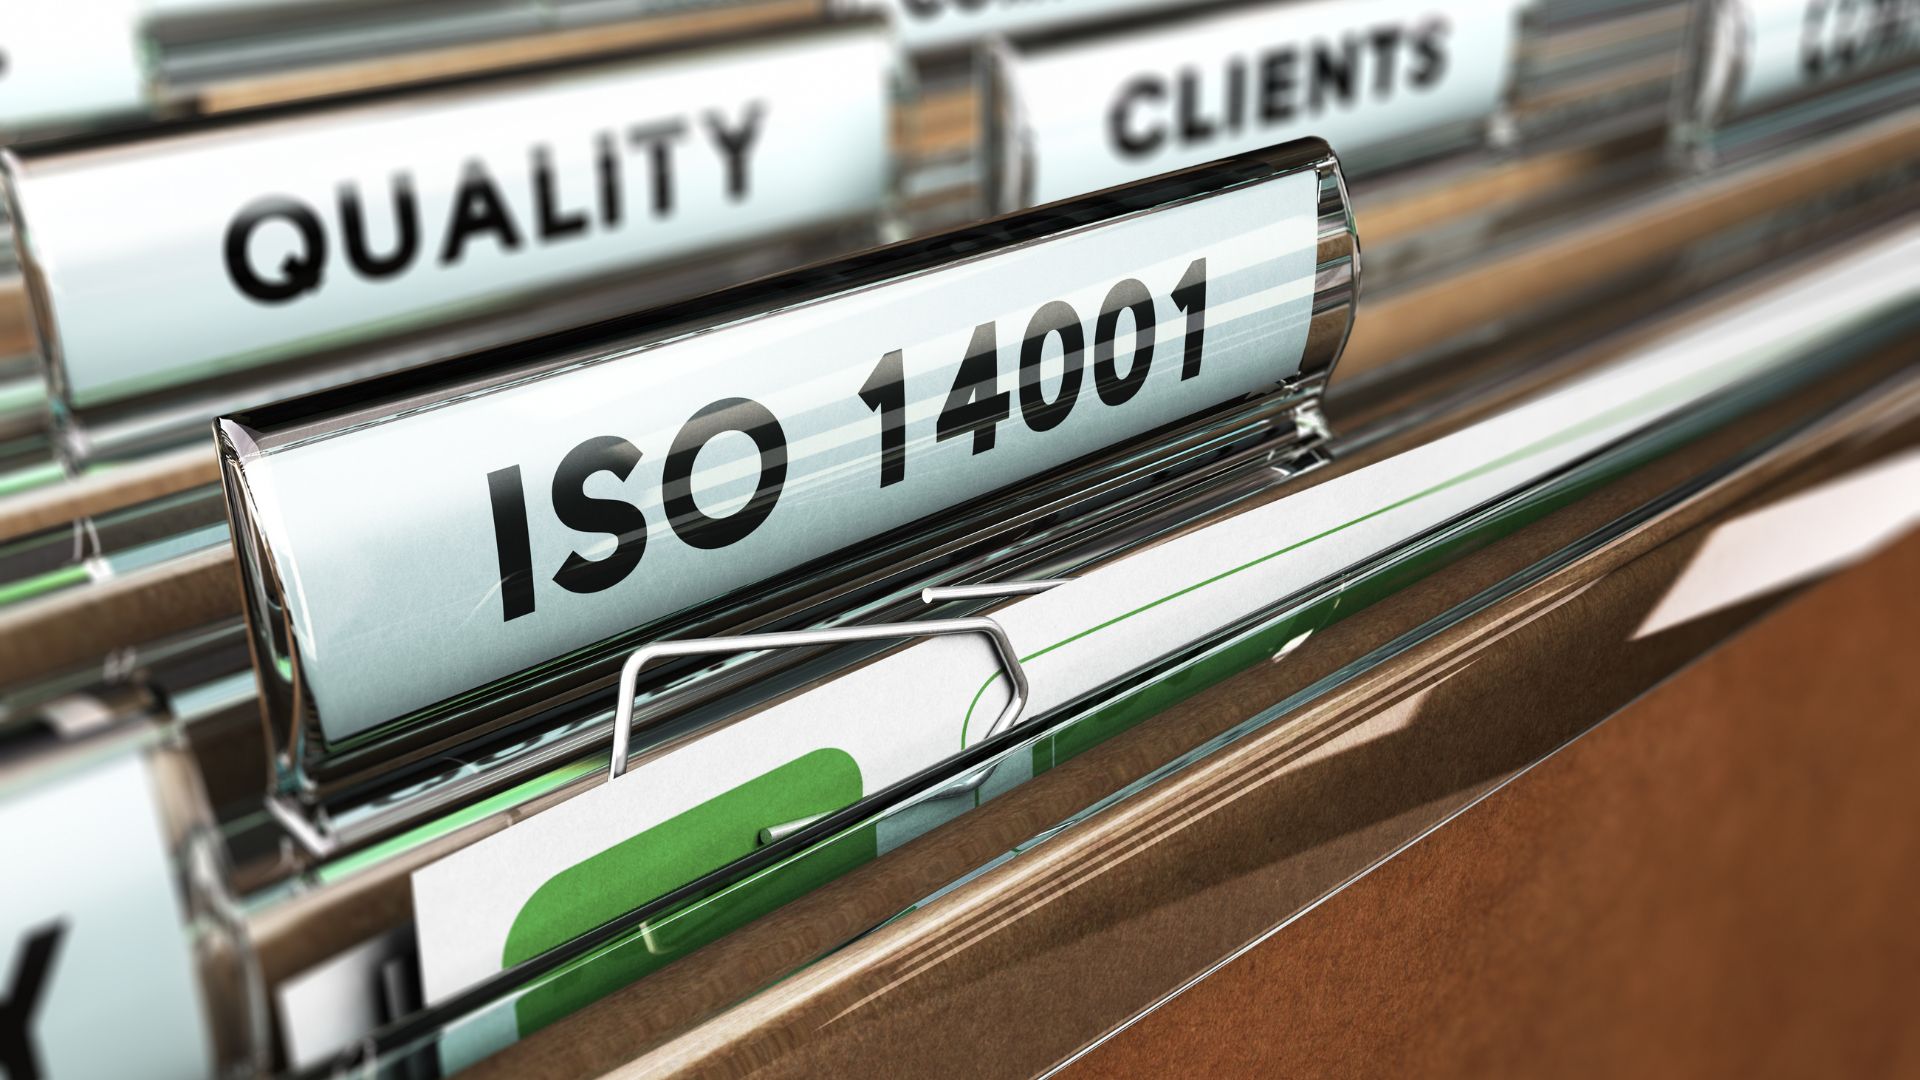 waste management using iso 14001 to reduce greenhouse gas emissions conclusion